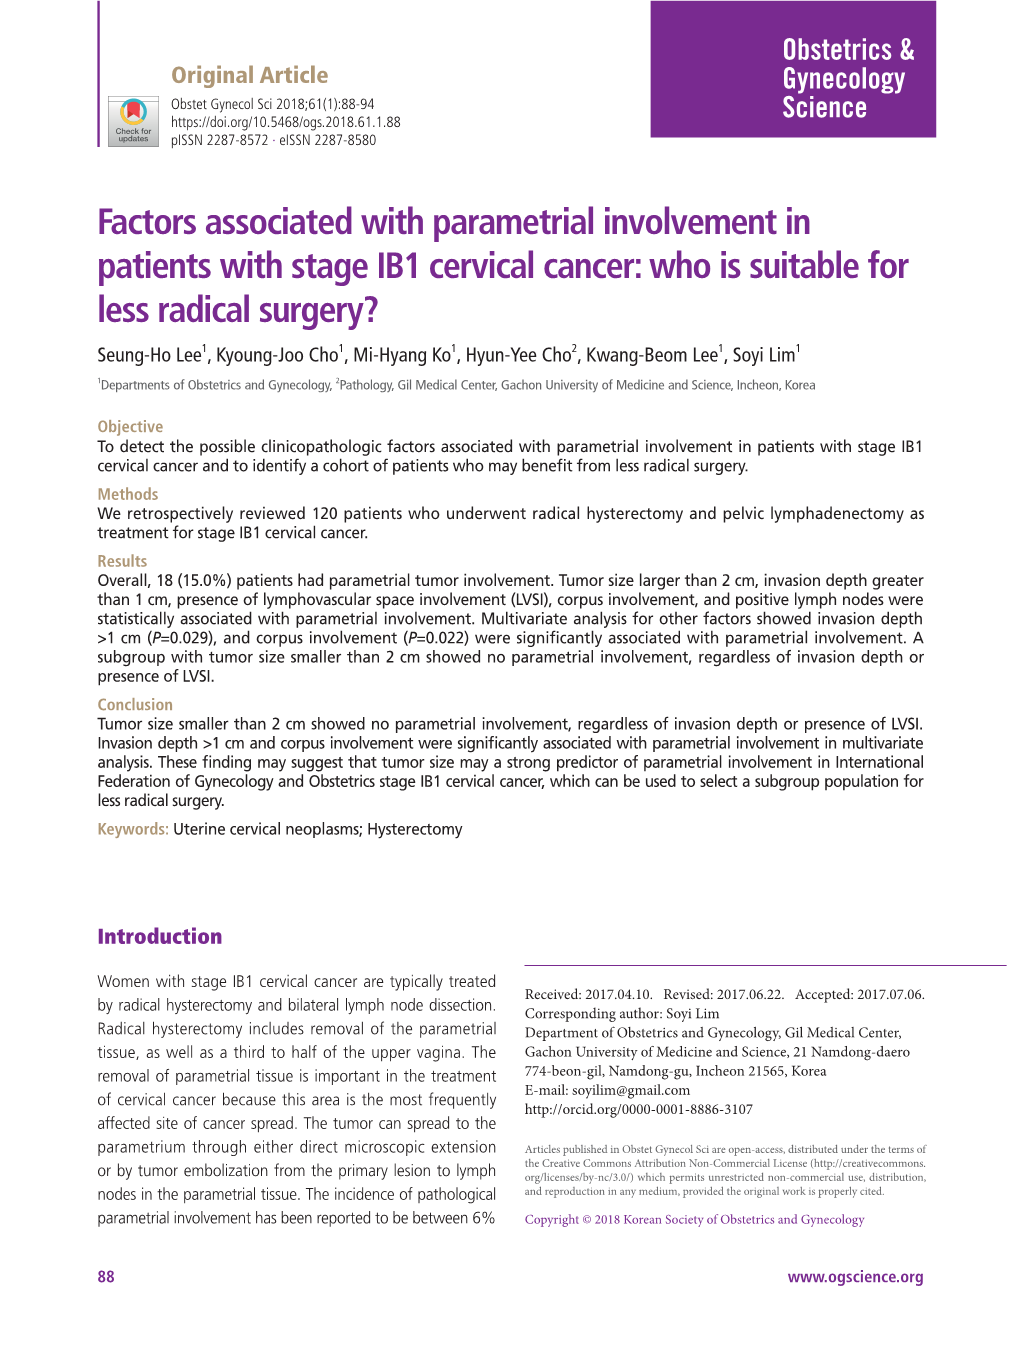 Factors Associated with Parametrial Involvement